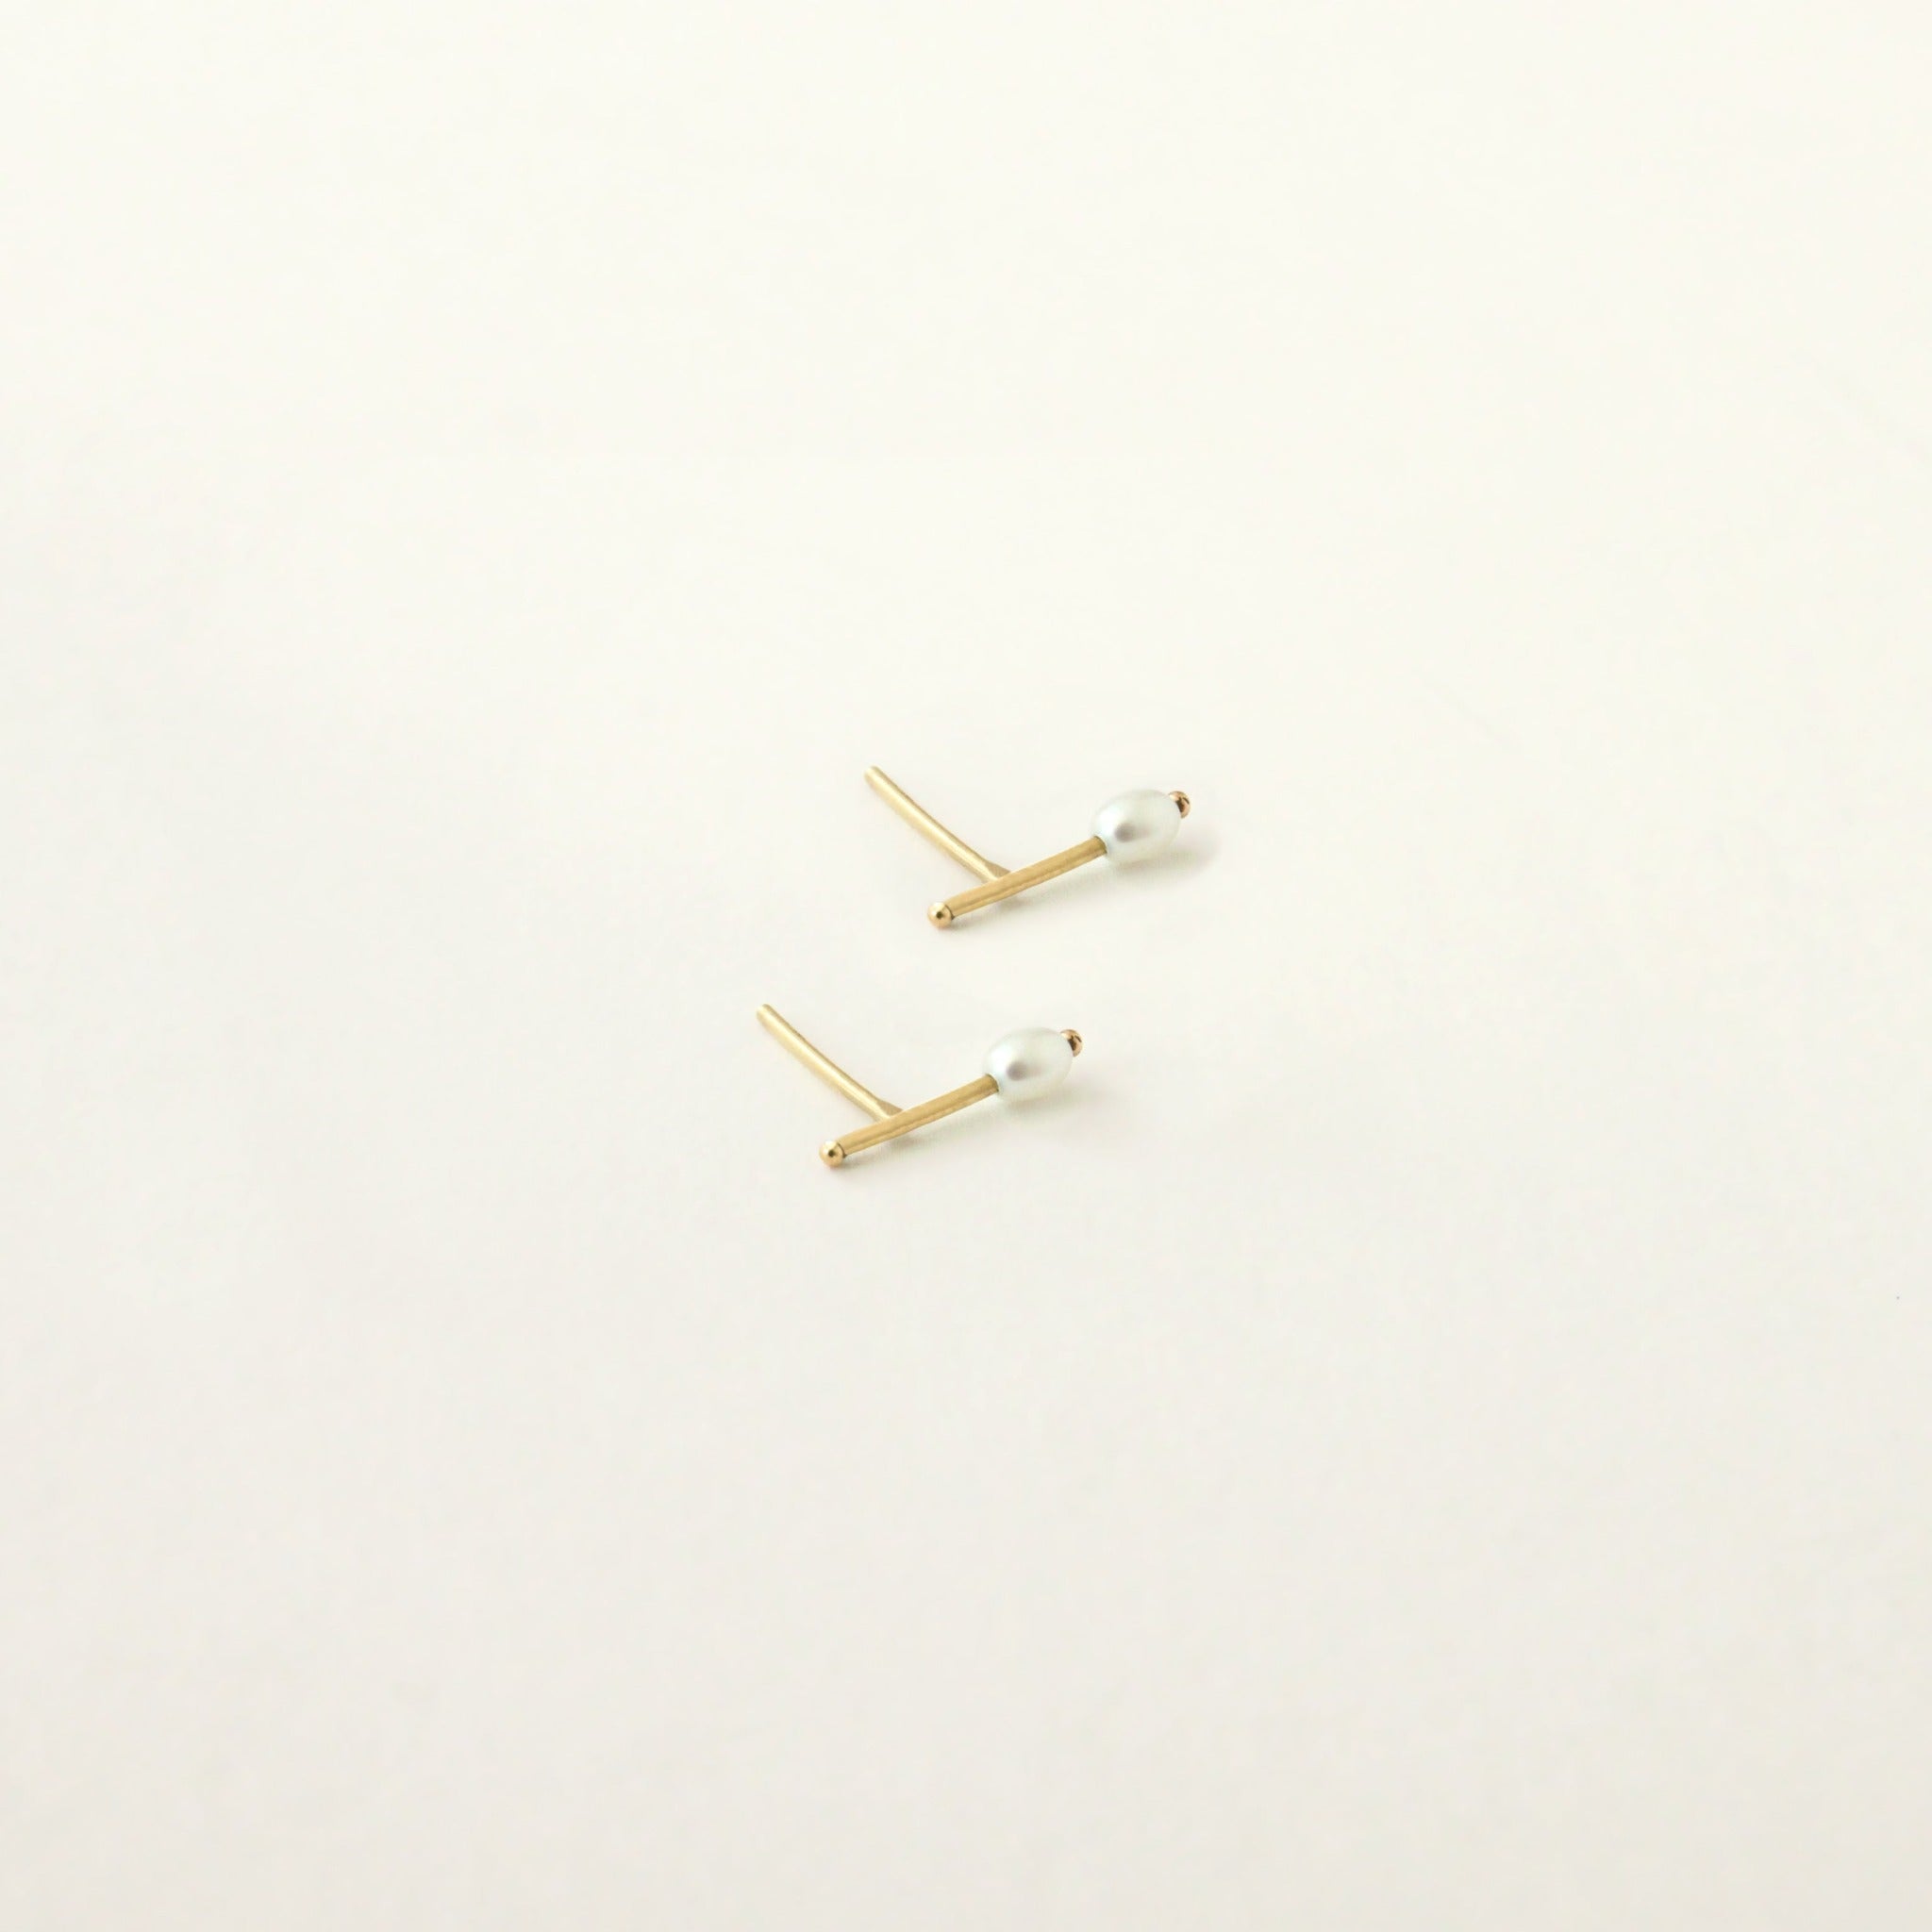 Dainty thin gold bar stud earring features a small oval pearl and small gold ball details on ends of the bar.